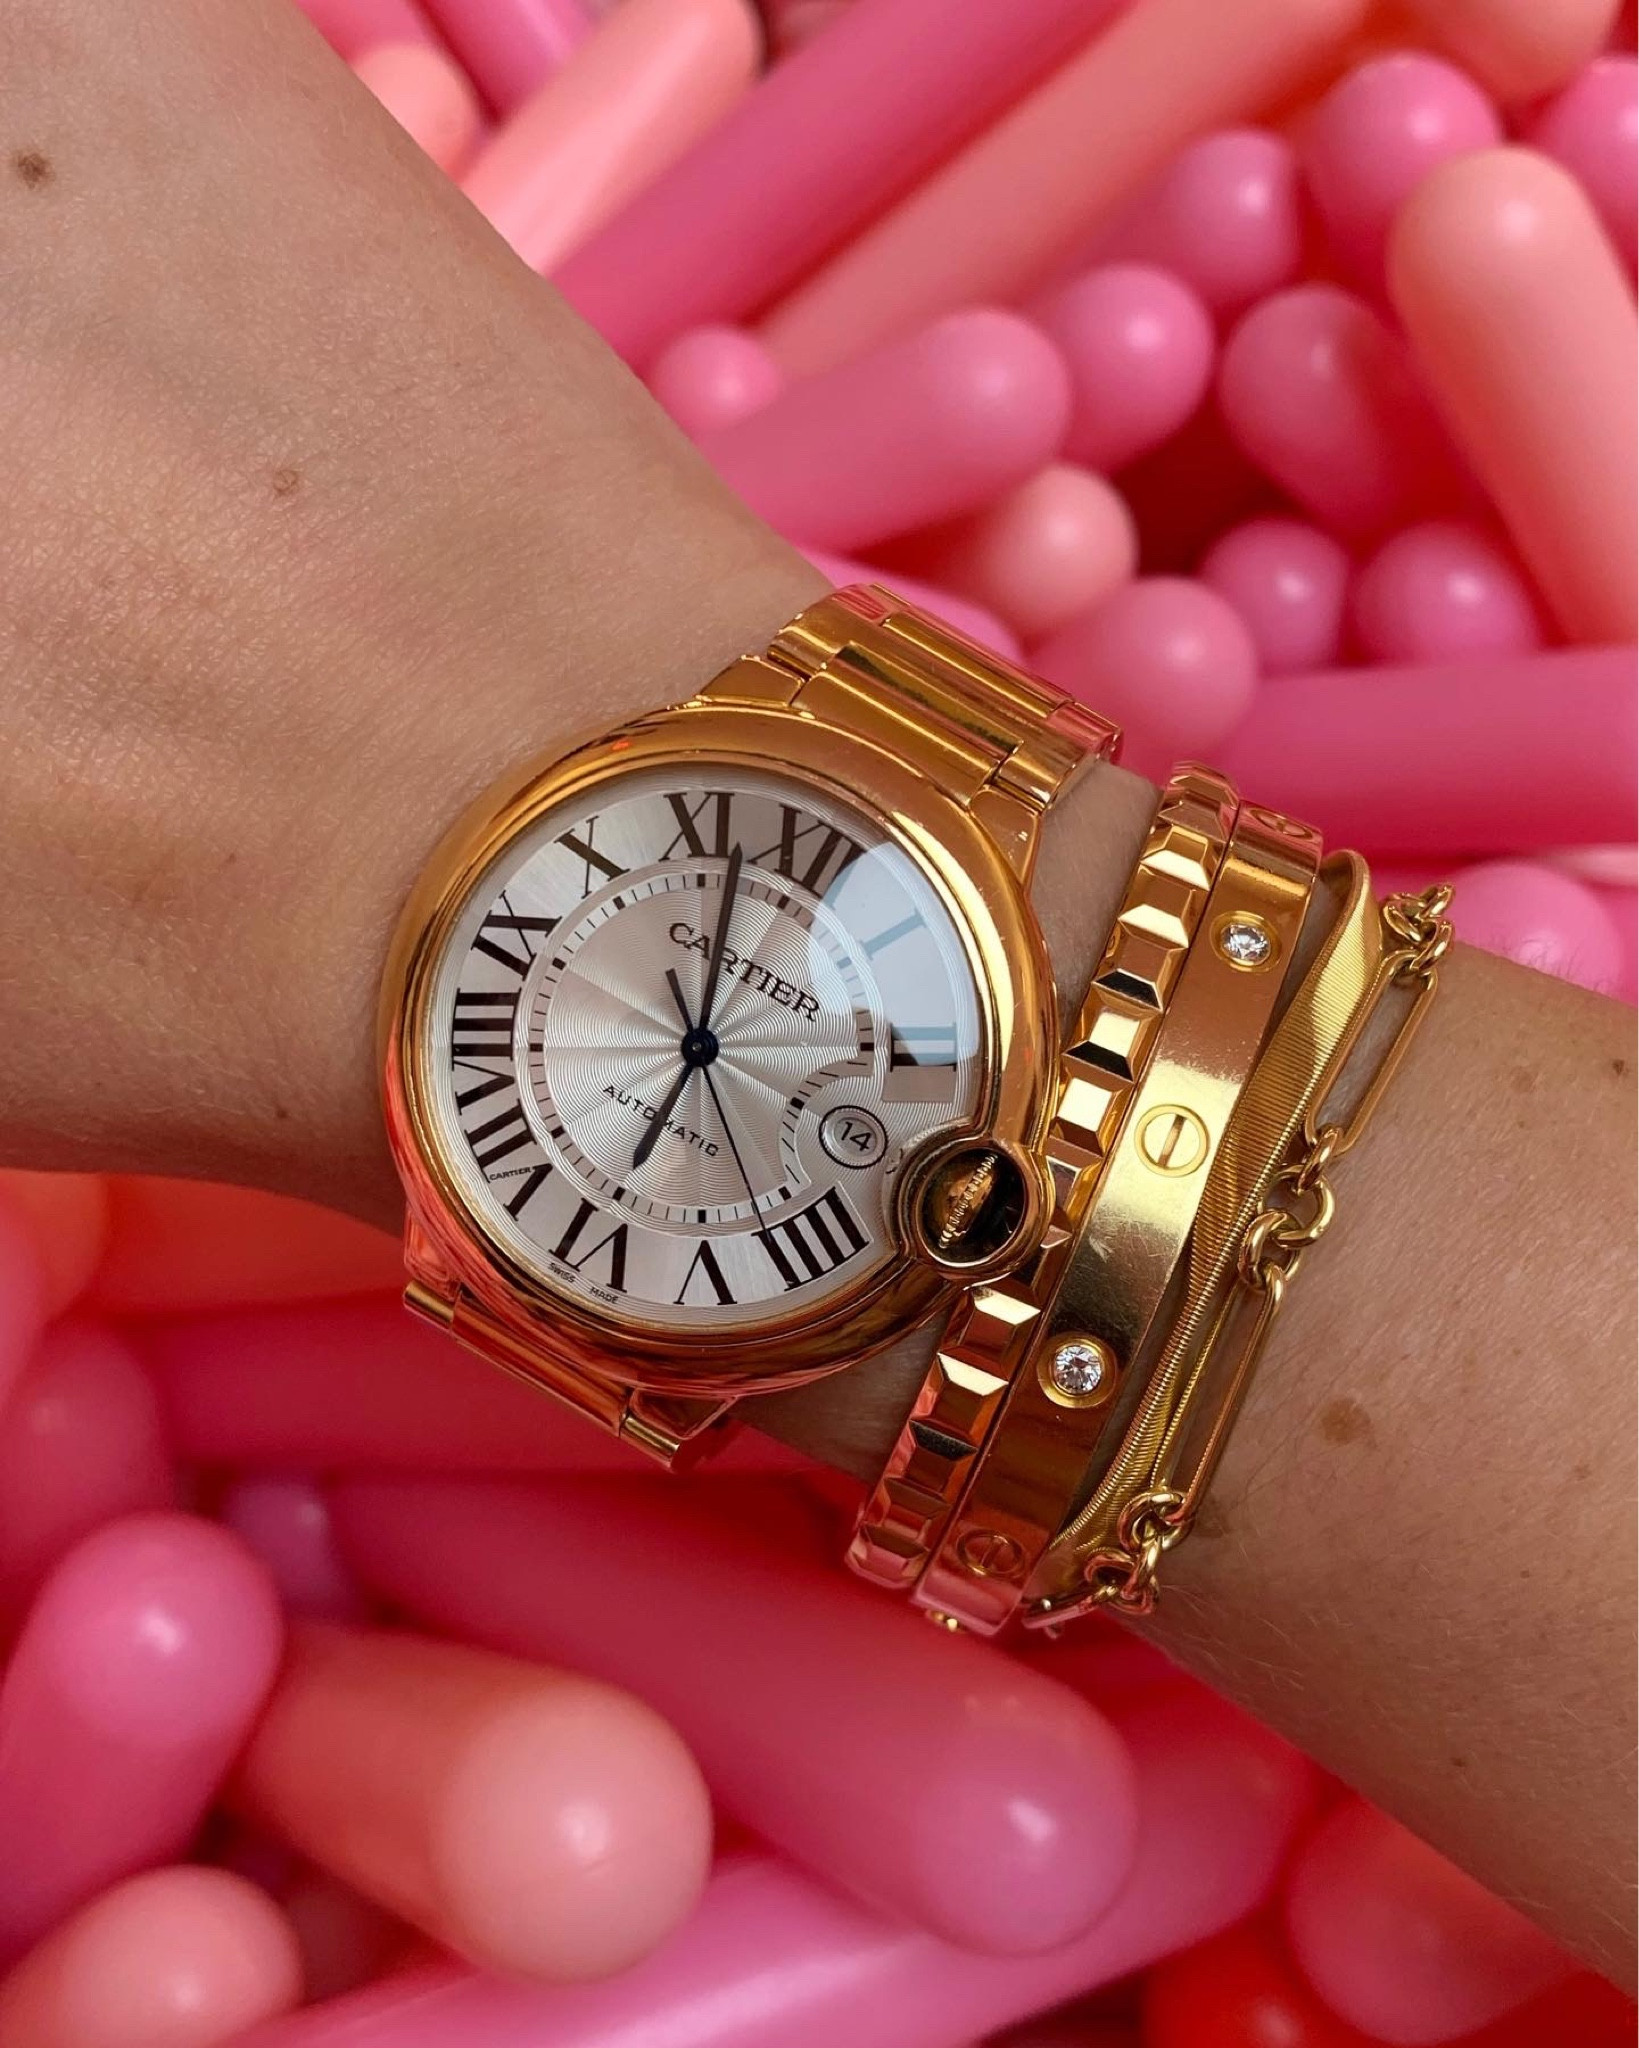 Cartier Love PInk Gold + Yellow Gold stacked - thoughts??  Rose gold  cartier bracelet, Cartier gold watch, Love bracelets